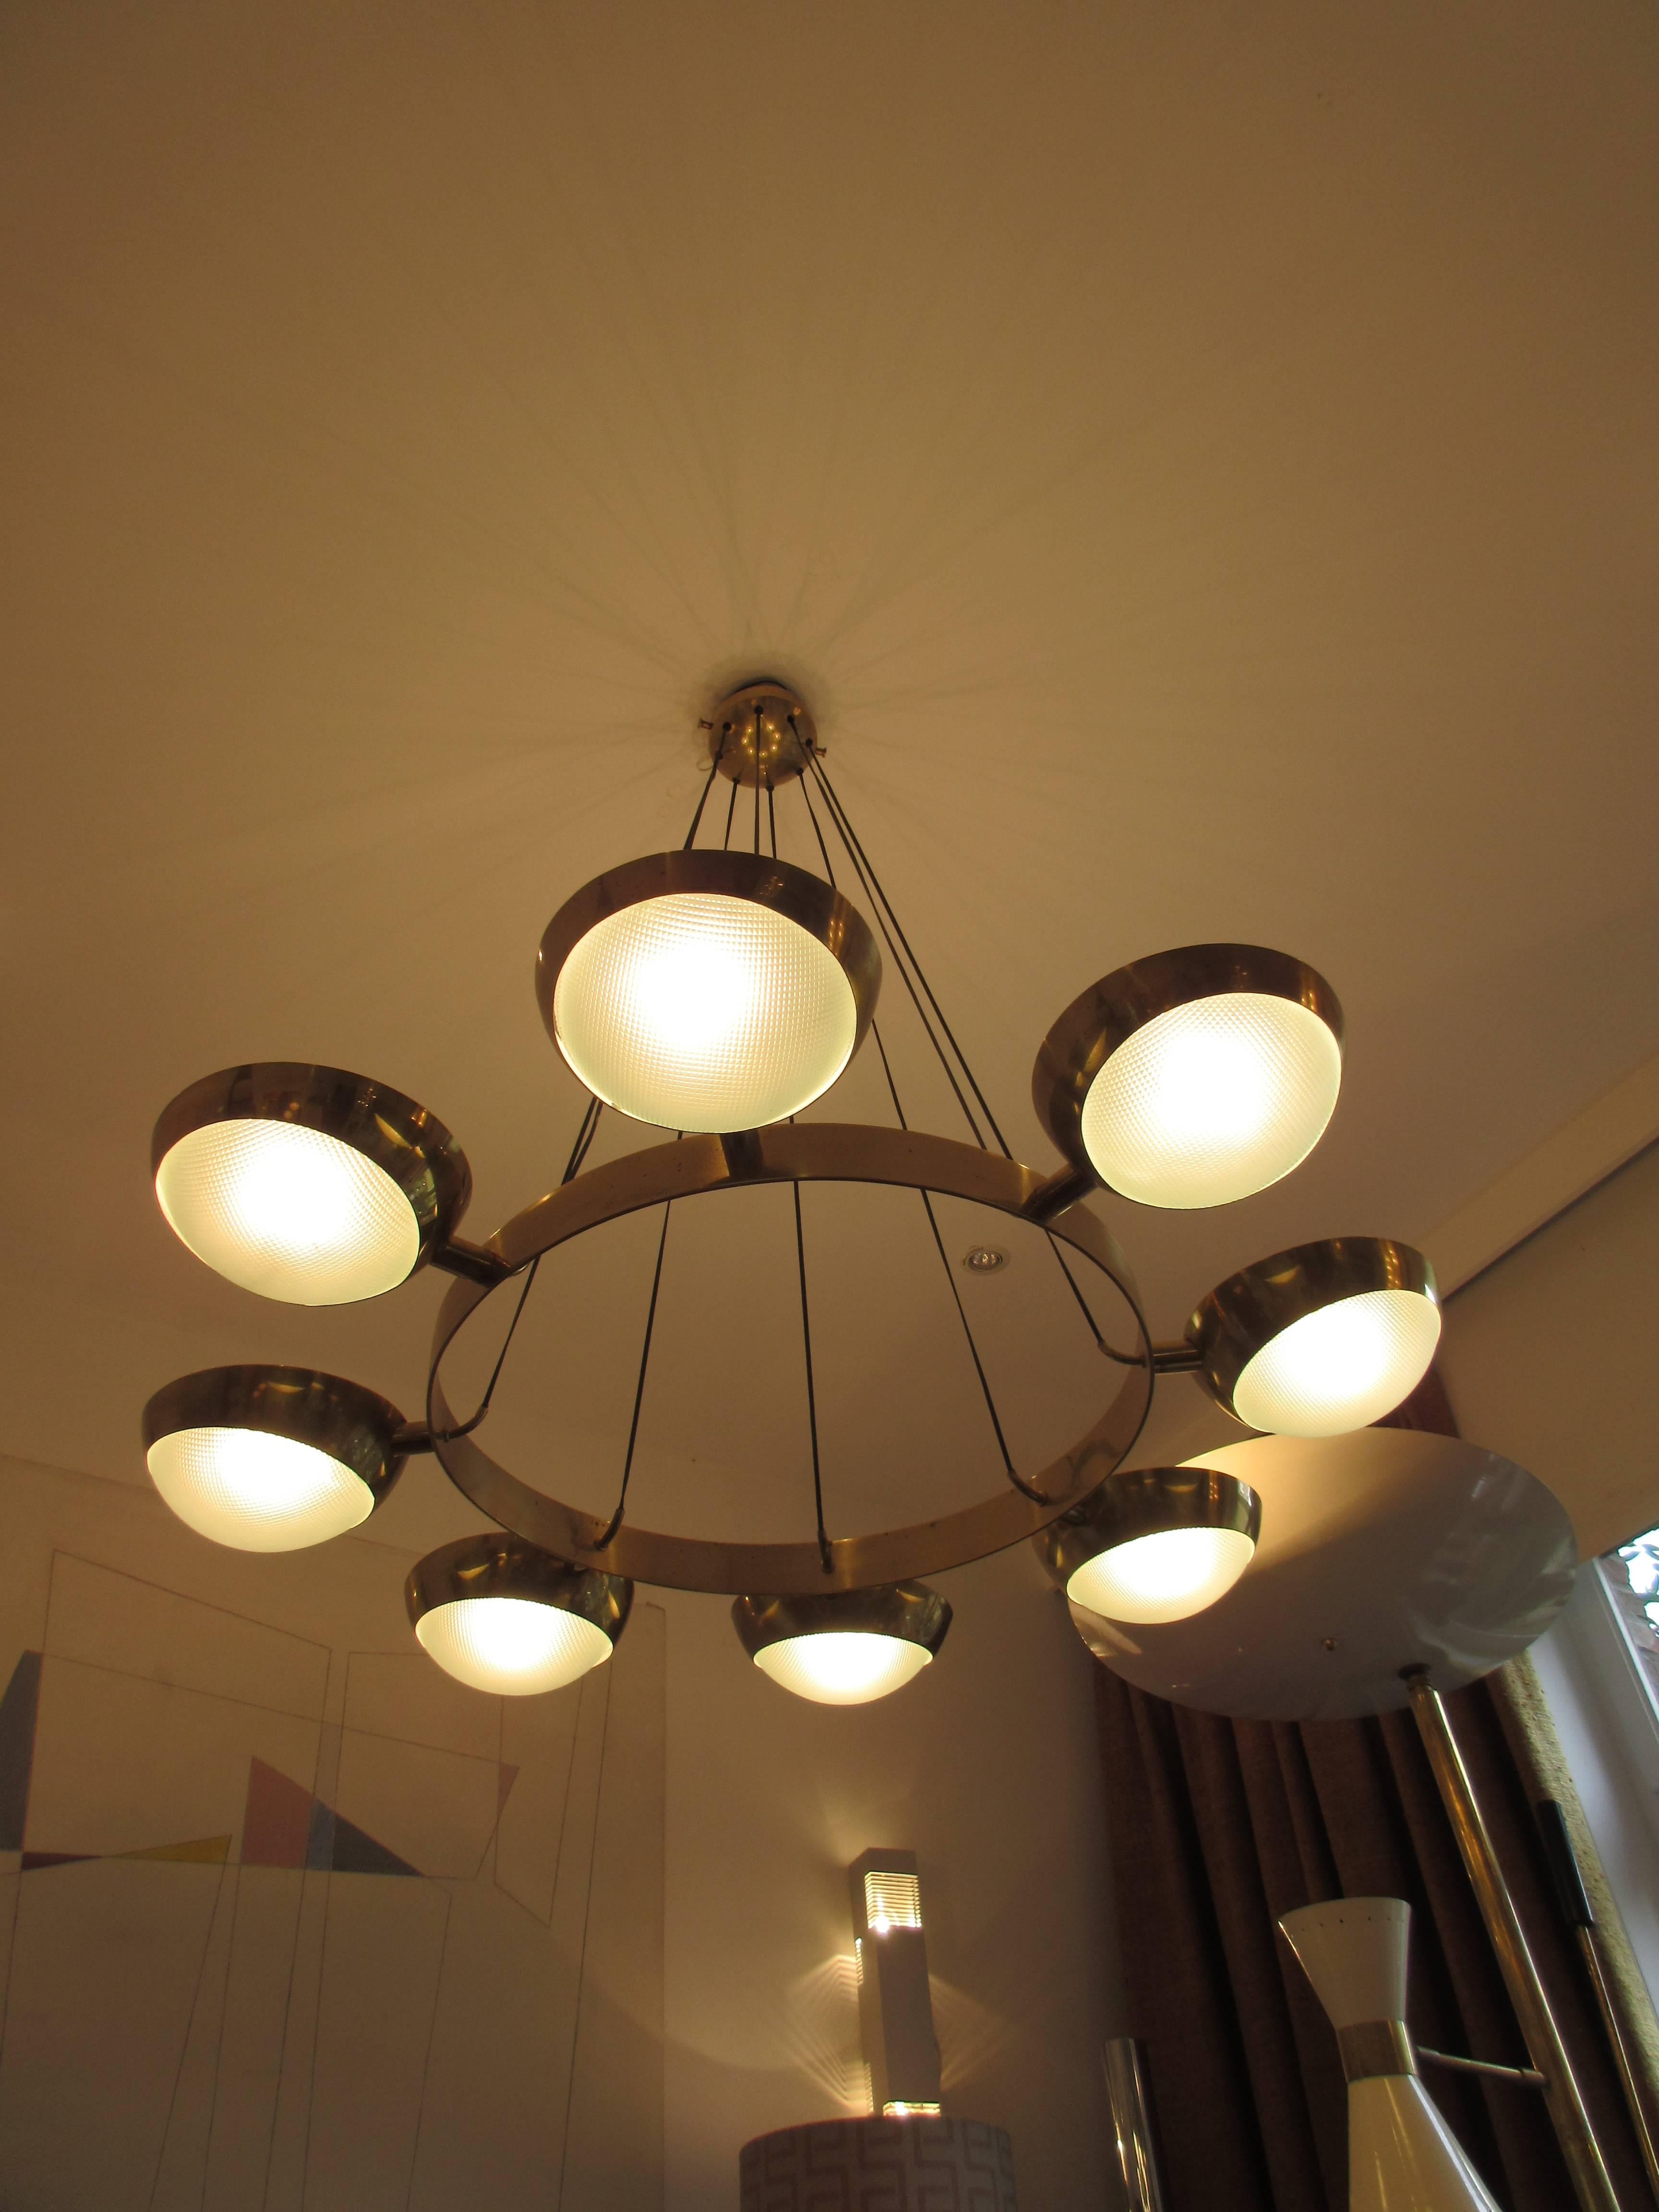 Polished brass ceiling lamp with eight lamps by Gino Sarfatti, Italy.

Height +/- 94 cm.

Width +/-+ 104 cm.

Diameter of the globes +/- 21 cm.

Gino Sarfatti (1912–1984) studied aeronaval engineering at the University of Genoa. From 1939